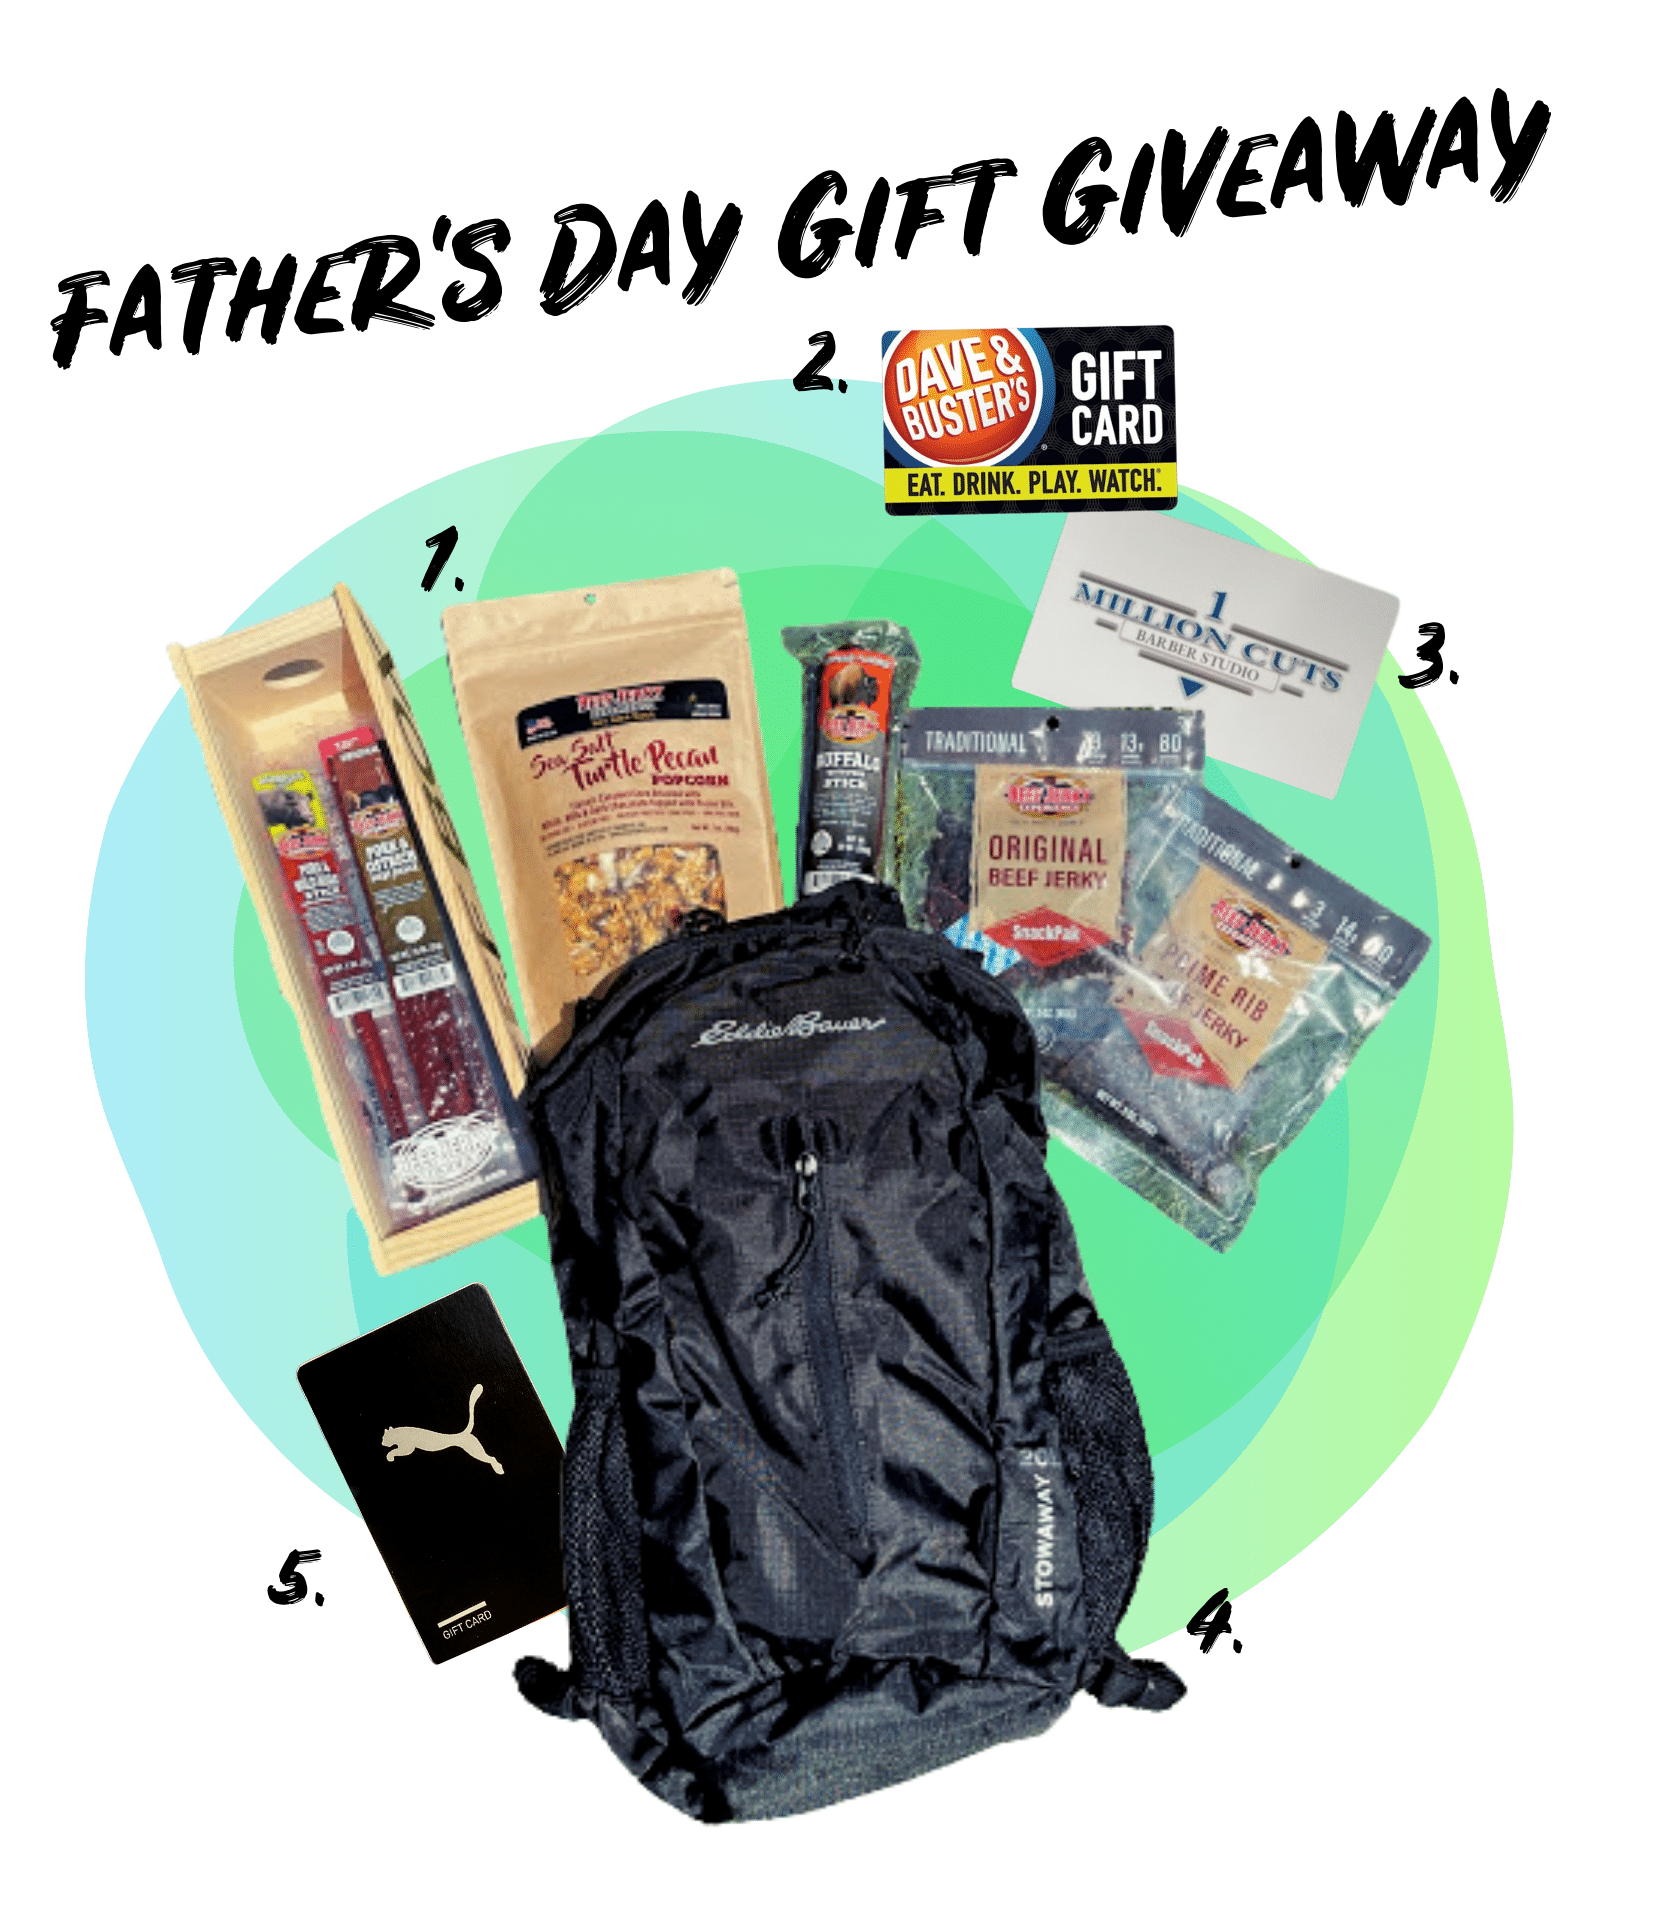 Father’s Day Giveaway & Gift Ideas